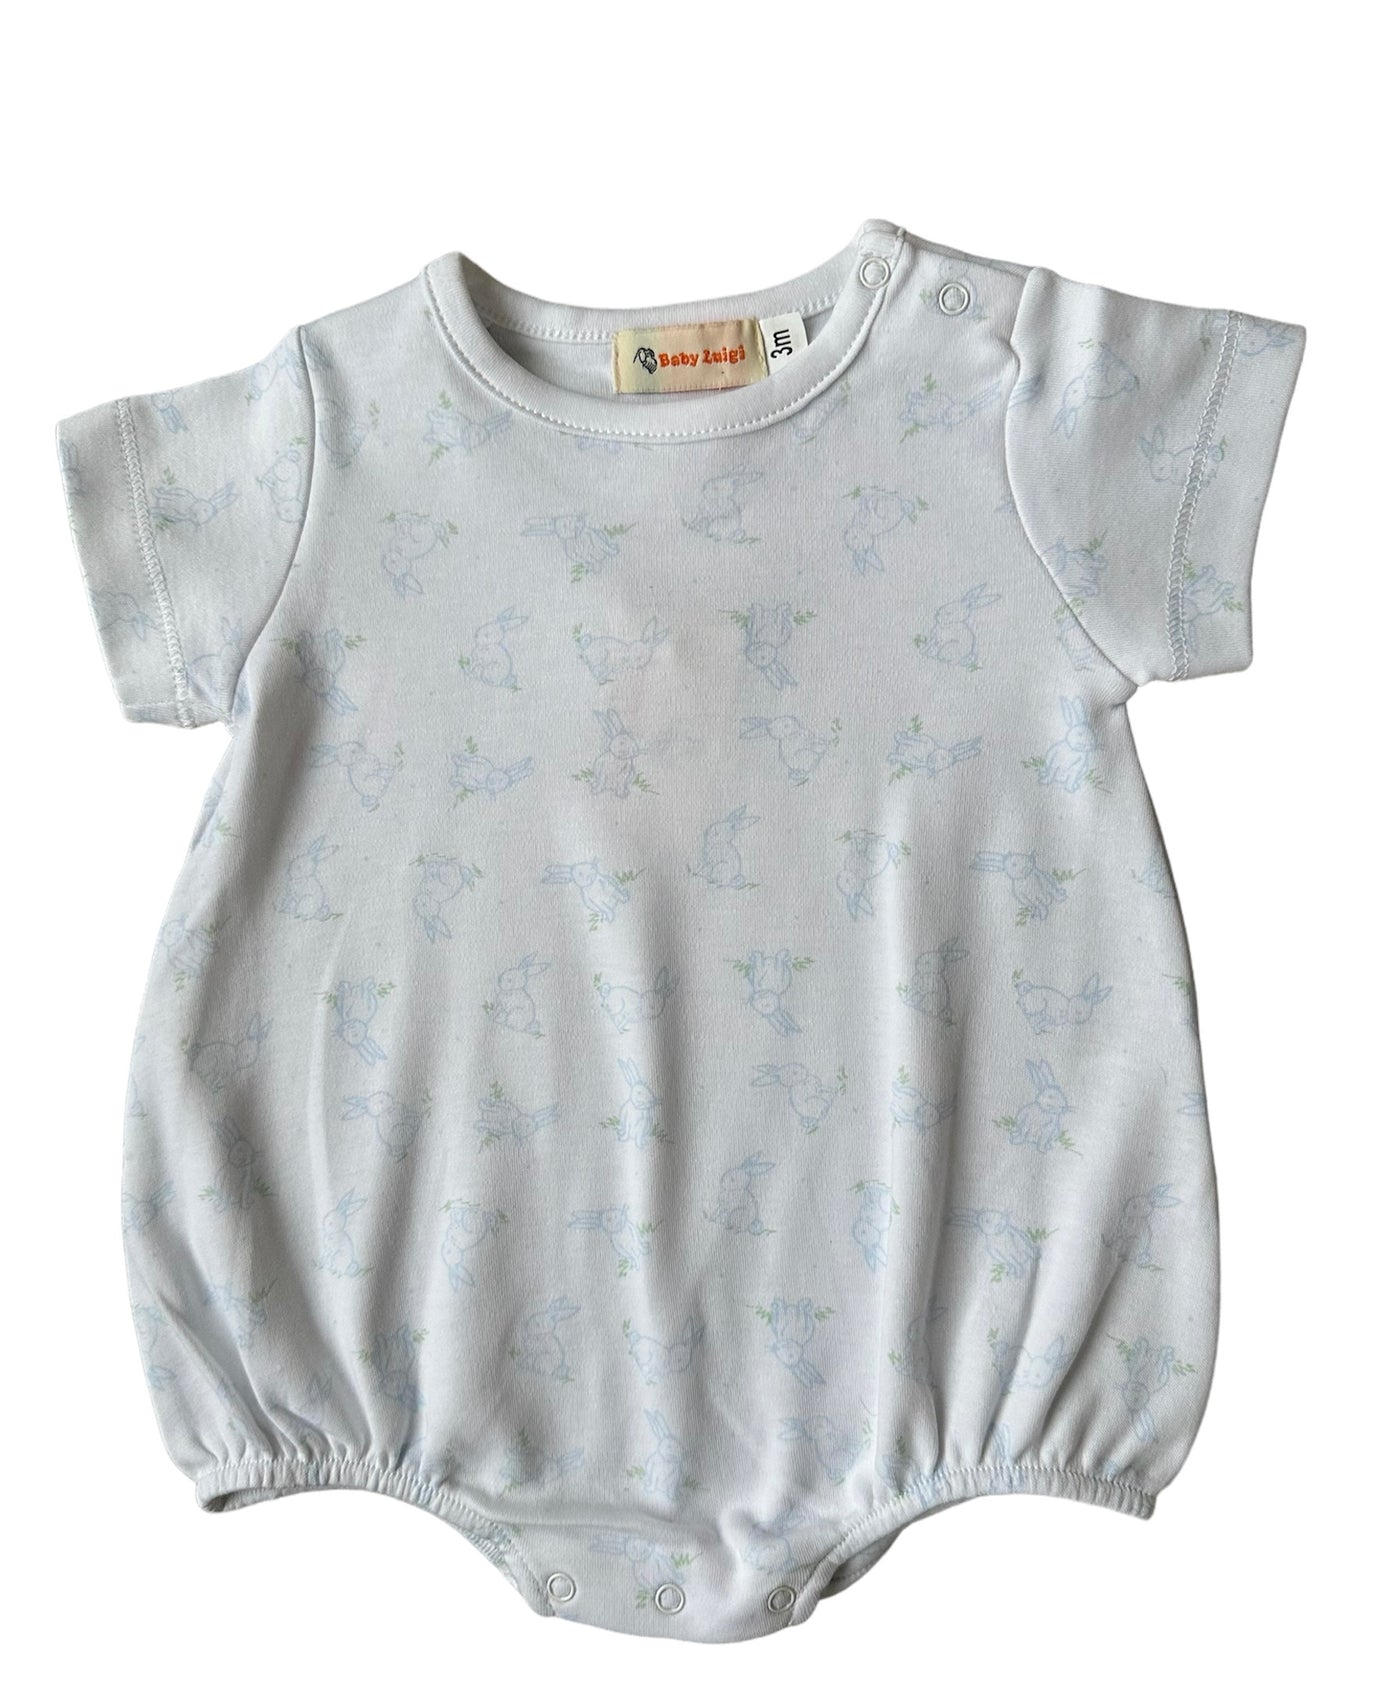 White Bubble Onesie with Sky Blue Bunny Print